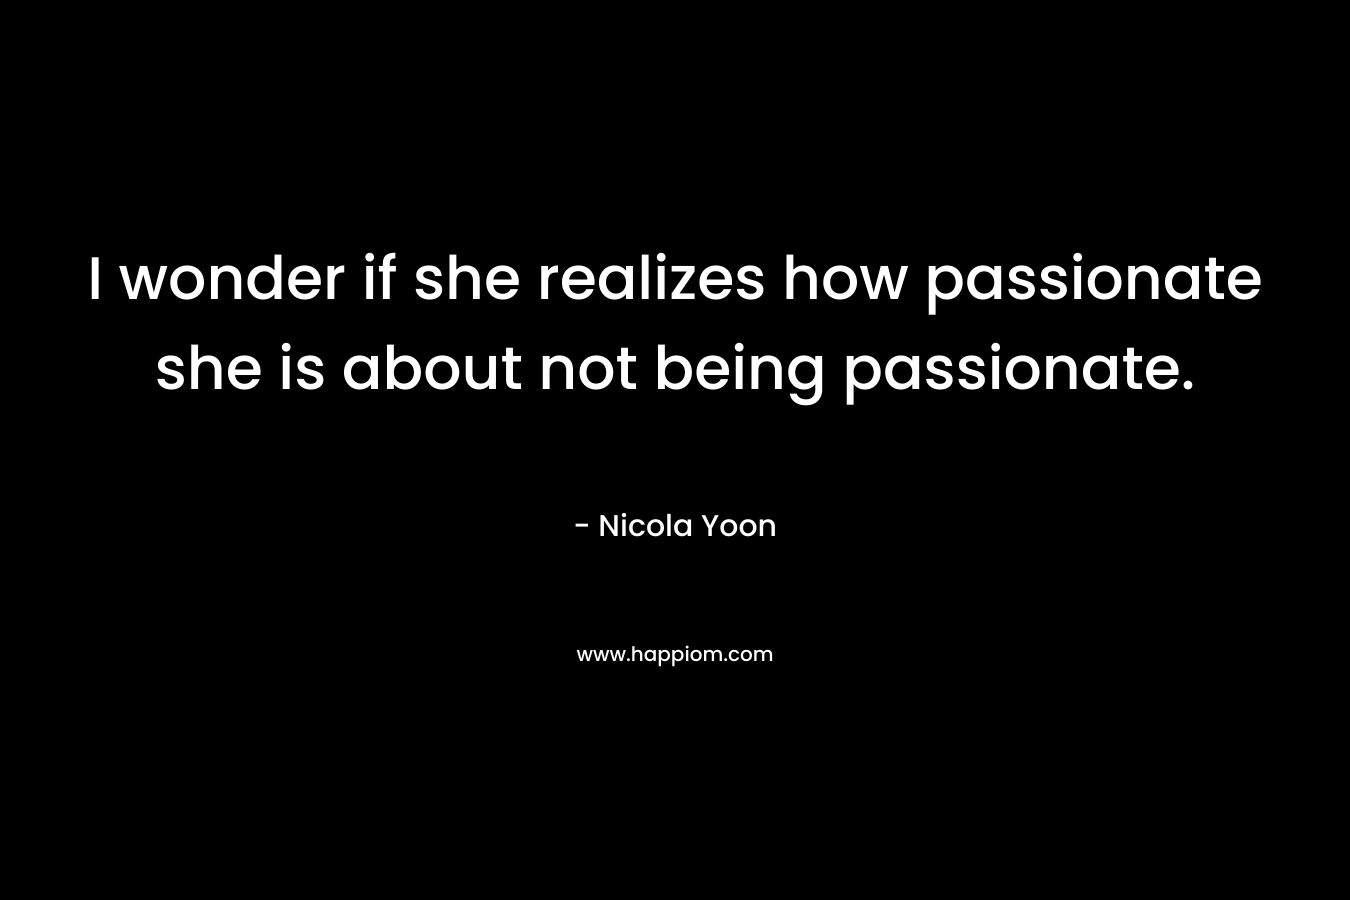 I wonder if she realizes how passionate she is about not being passionate.